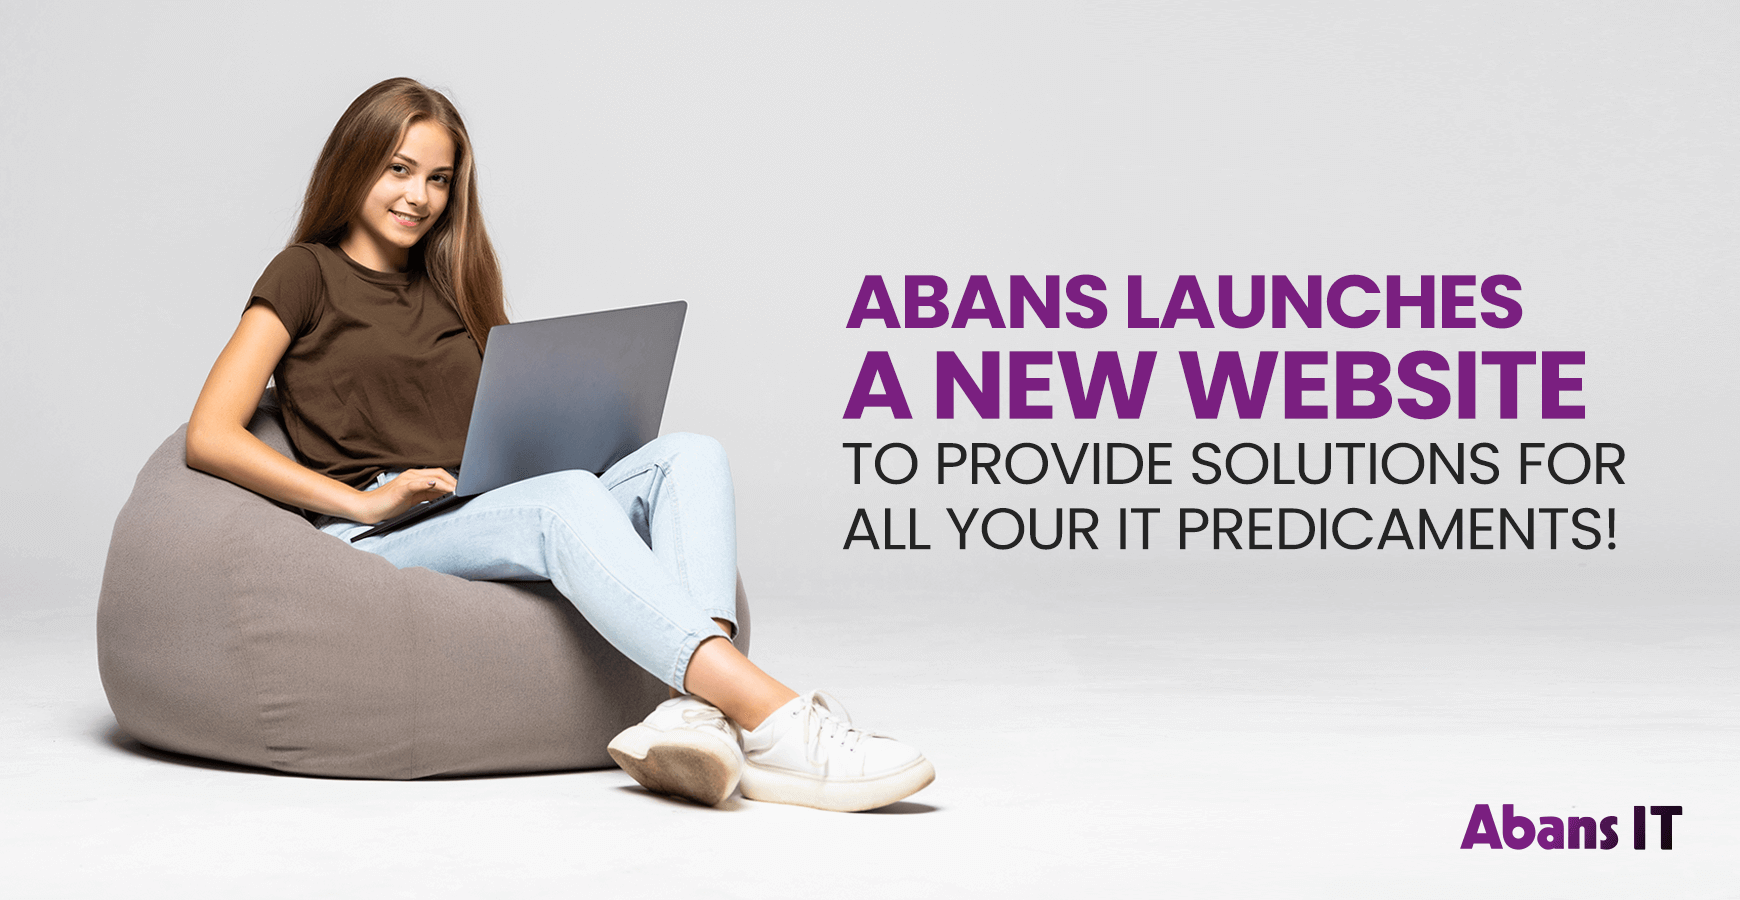 Abans launches a new website 